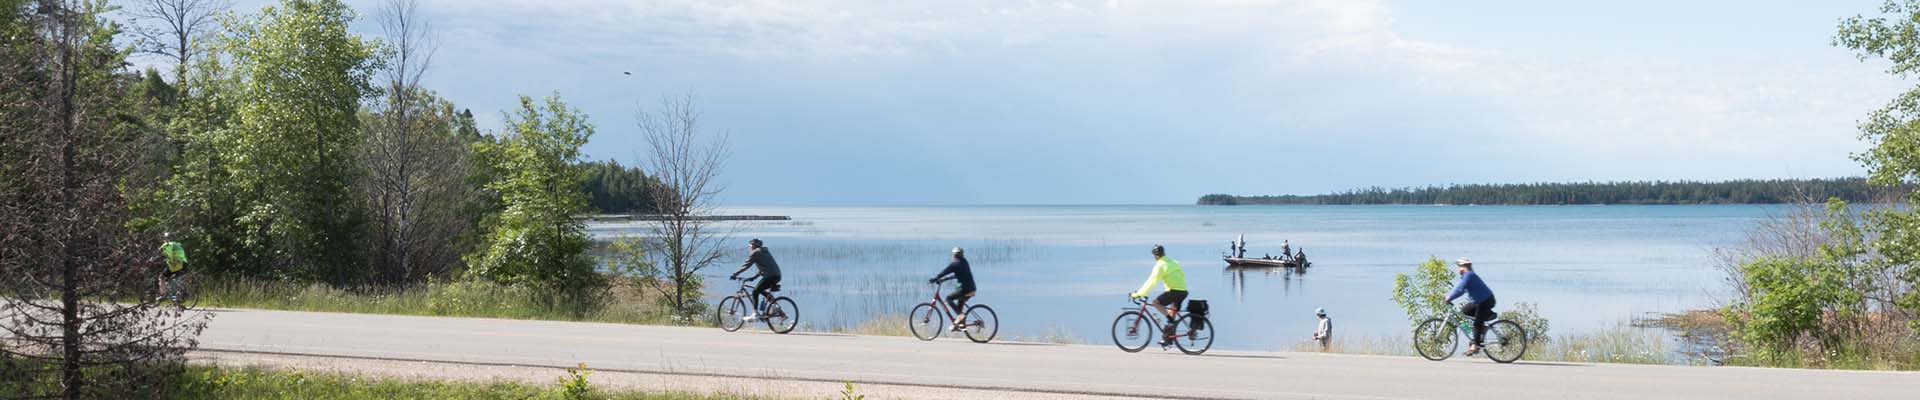 Distance shot of people riding bikes on a path along the lake